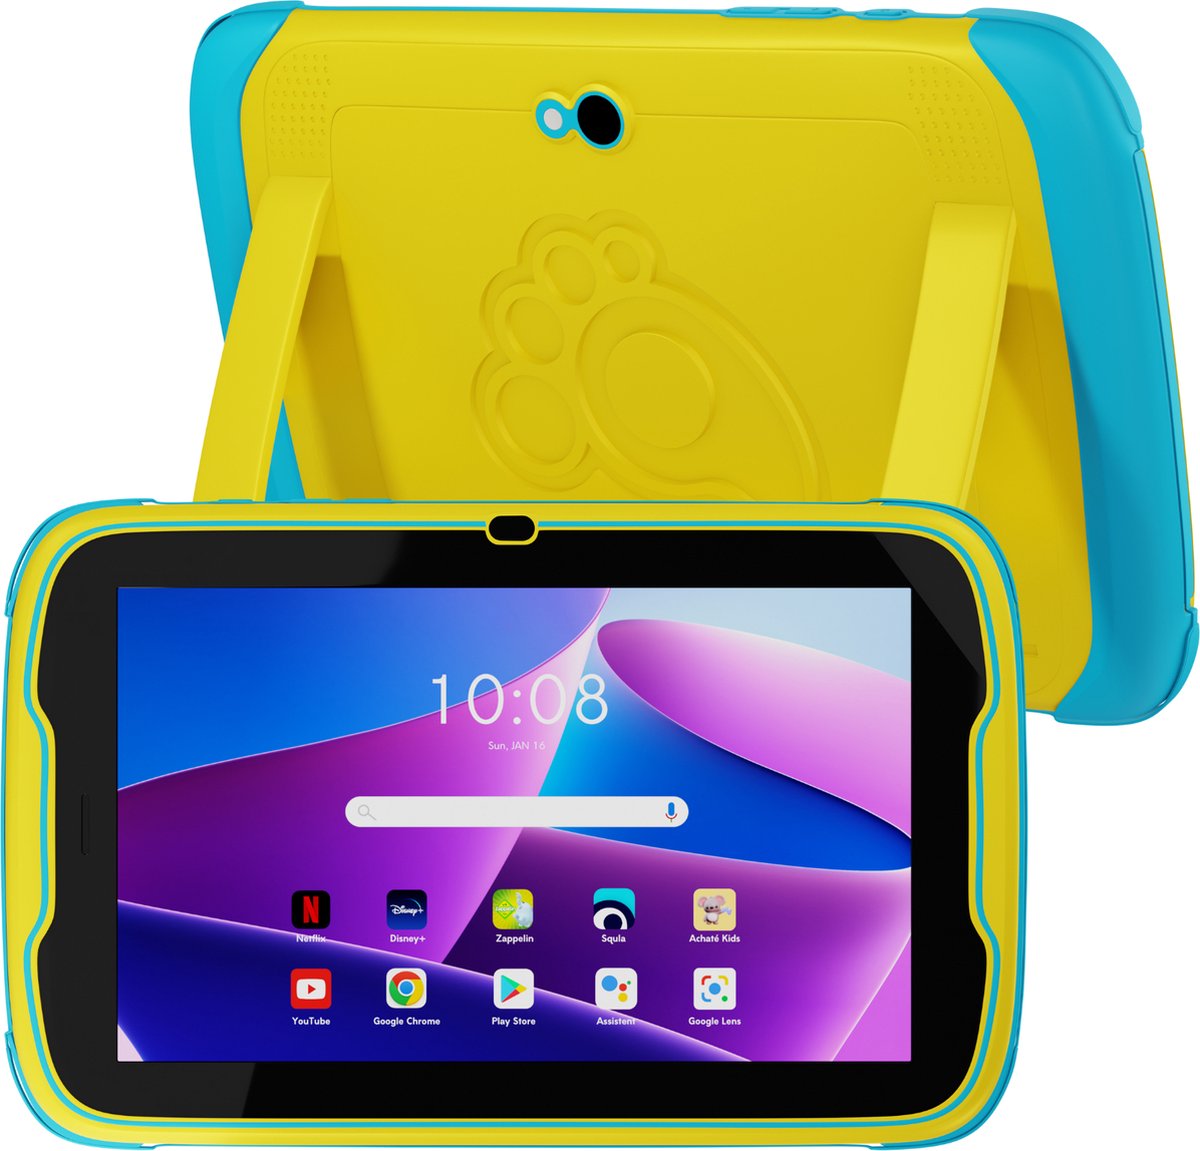 Tablette Android 10 pouces, Tablette M10, Tablette Android 10.0